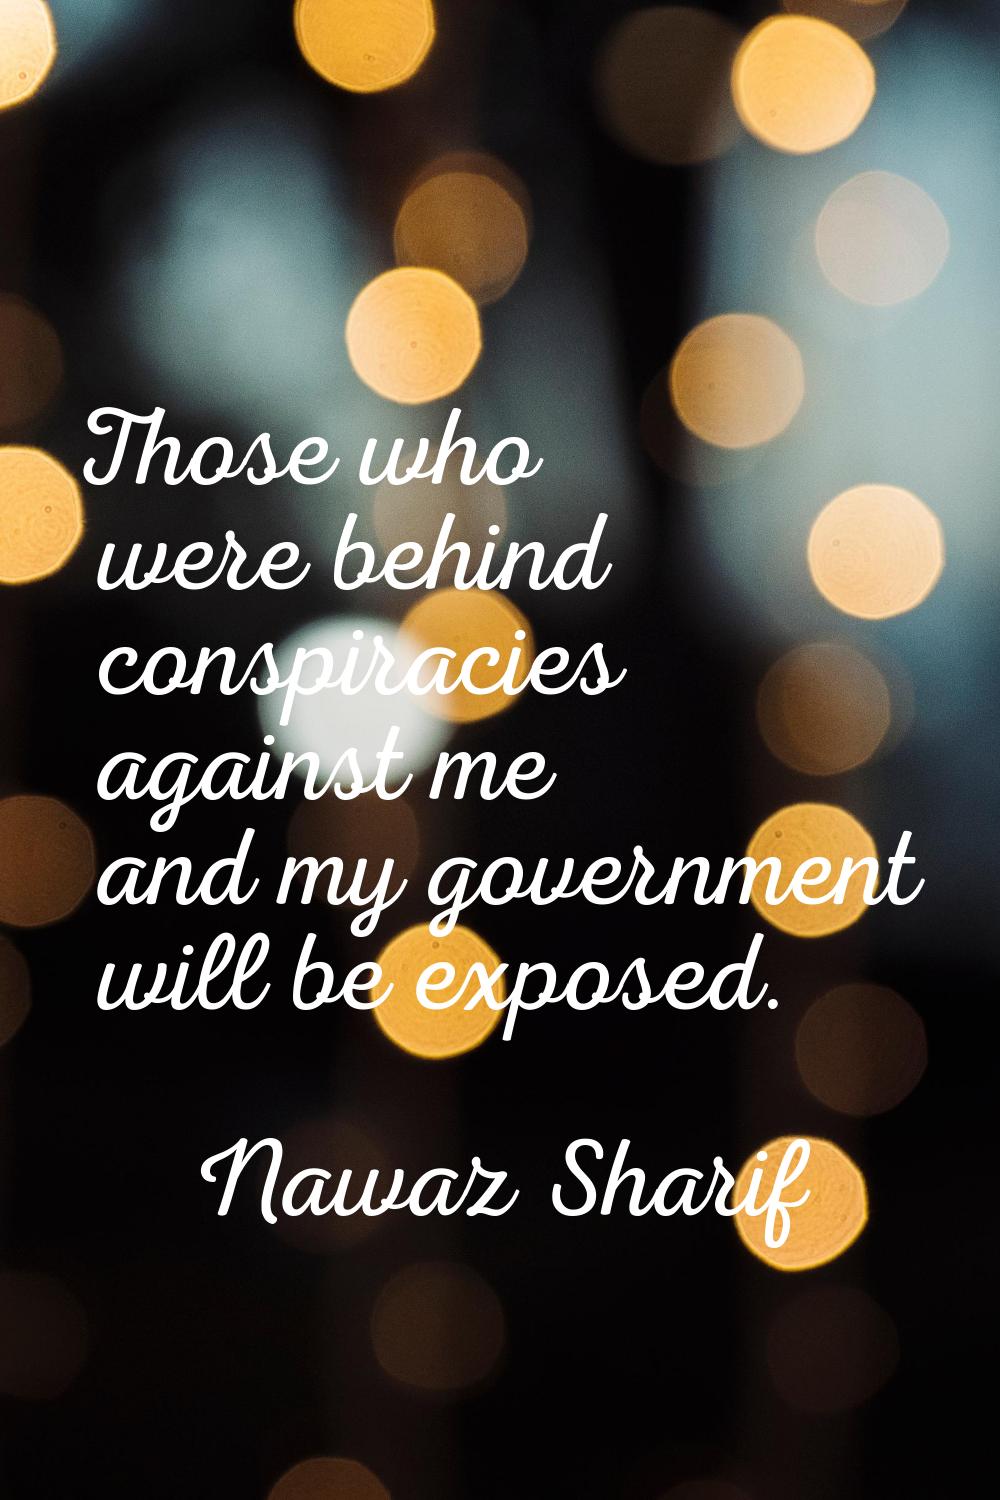 Those who were behind conspiracies against me and my government will be exposed.